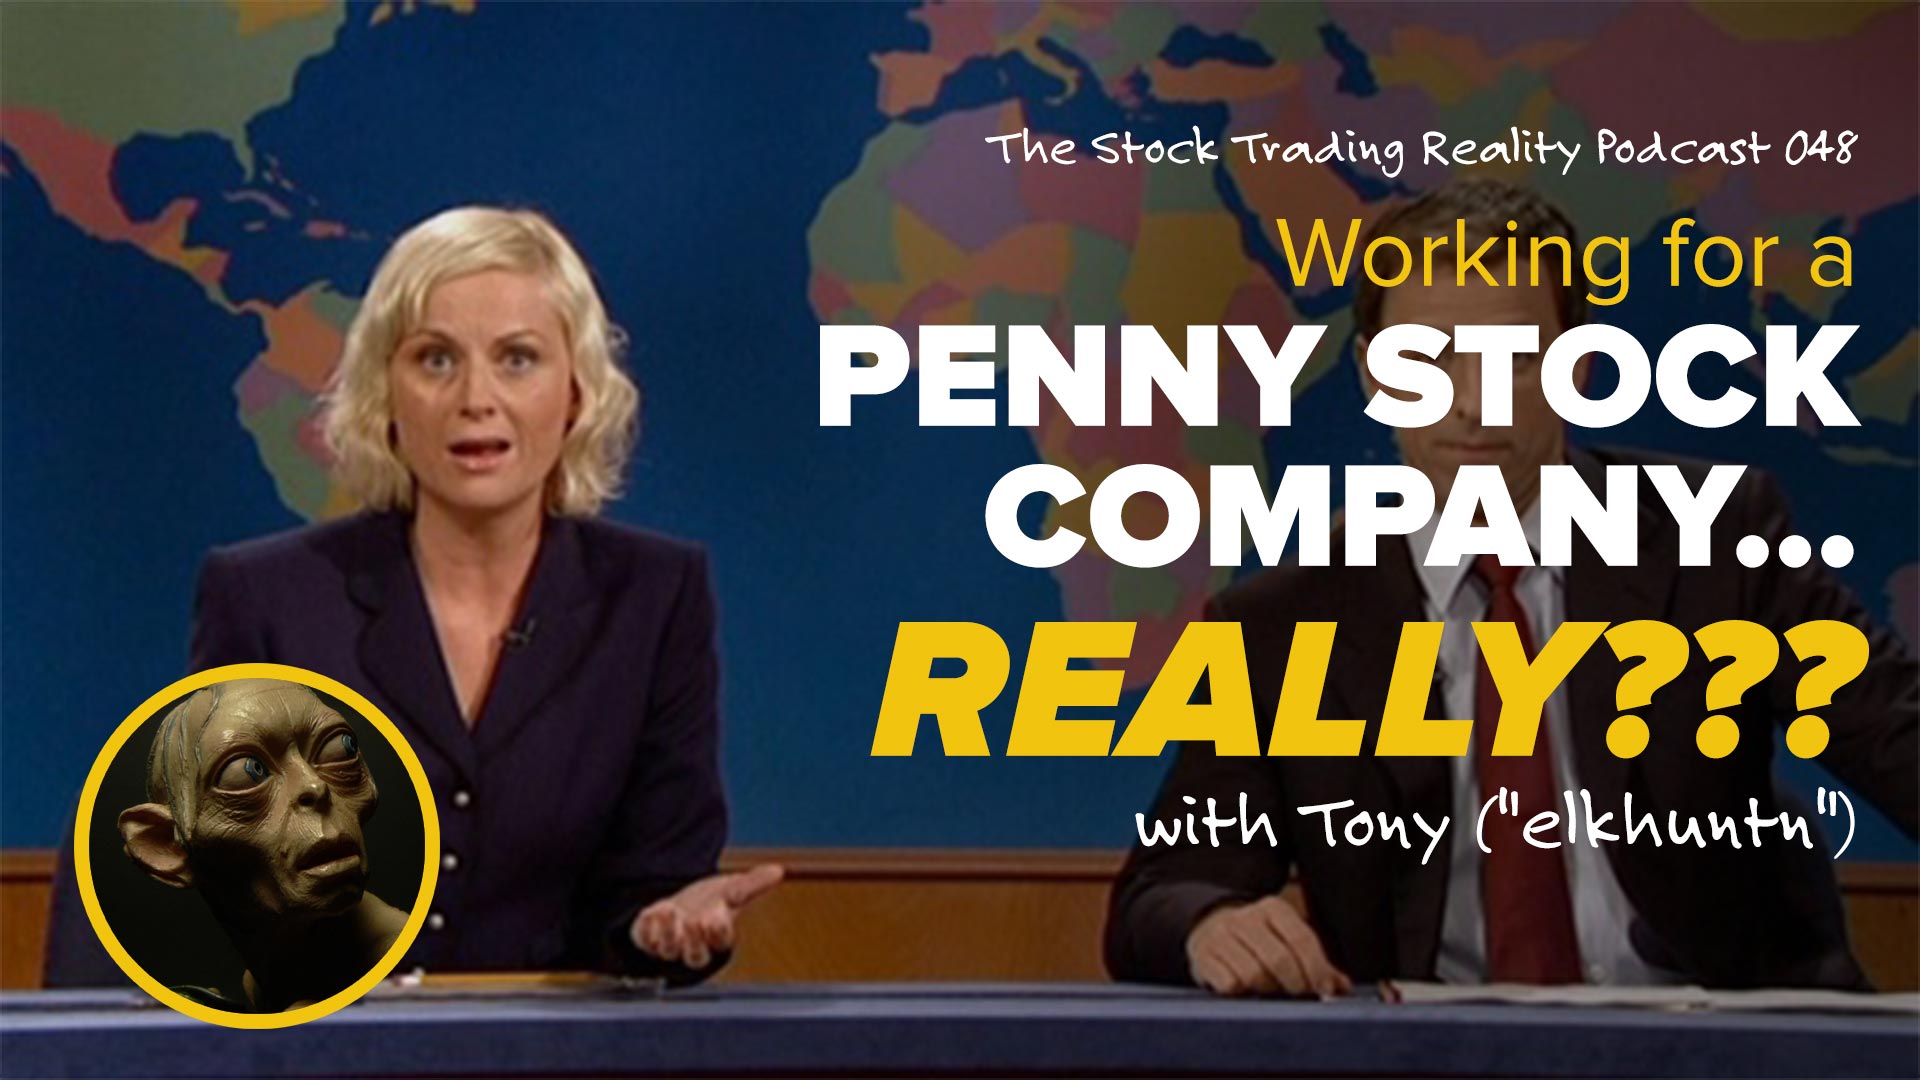 STR 048: Working for a Penny Stock Company... Really???